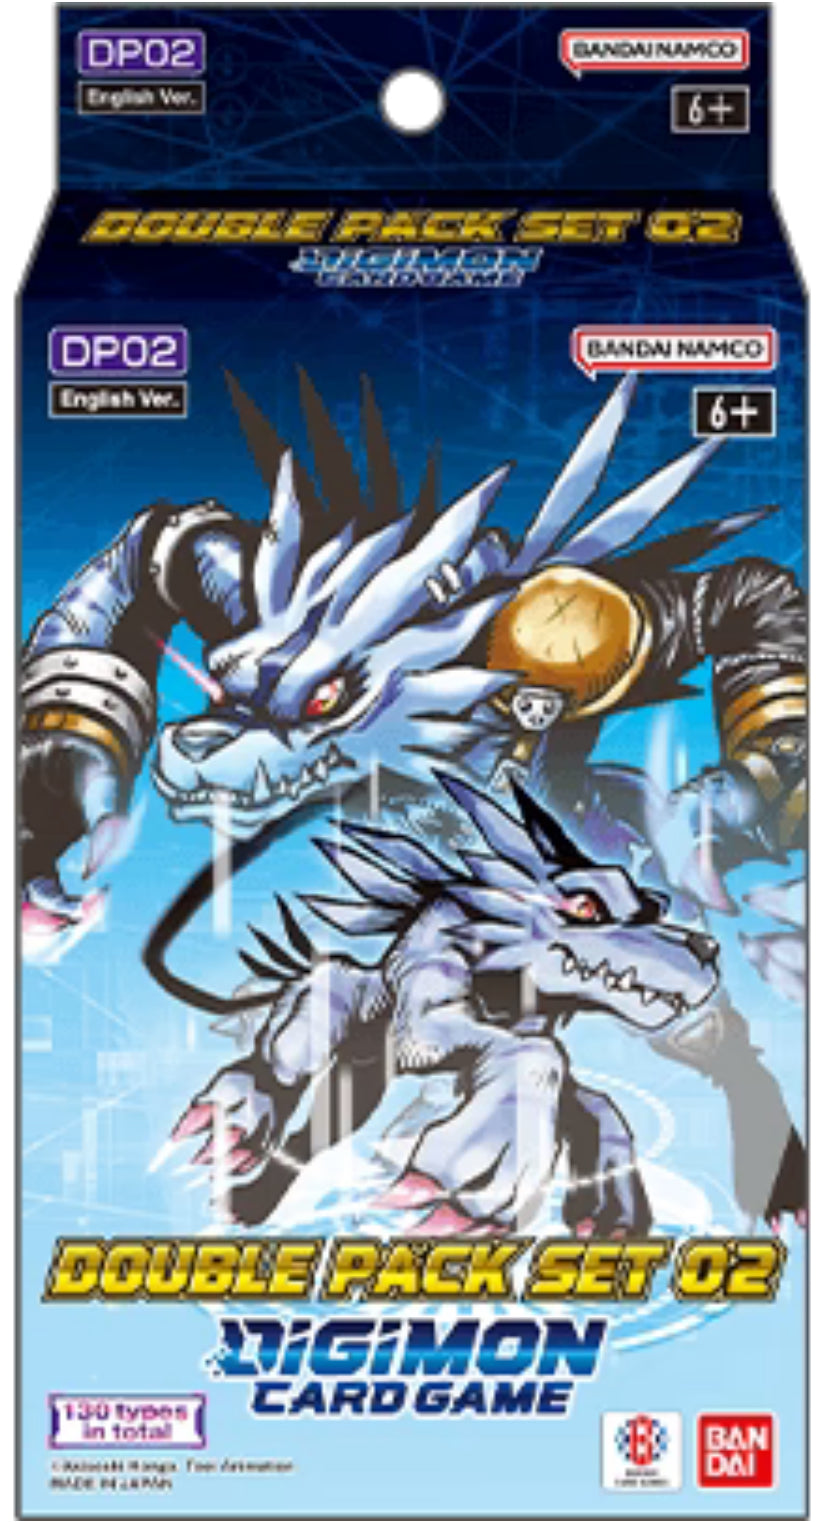 Digimon Card Game - Double Pack Set Volume 2 [DP-02]